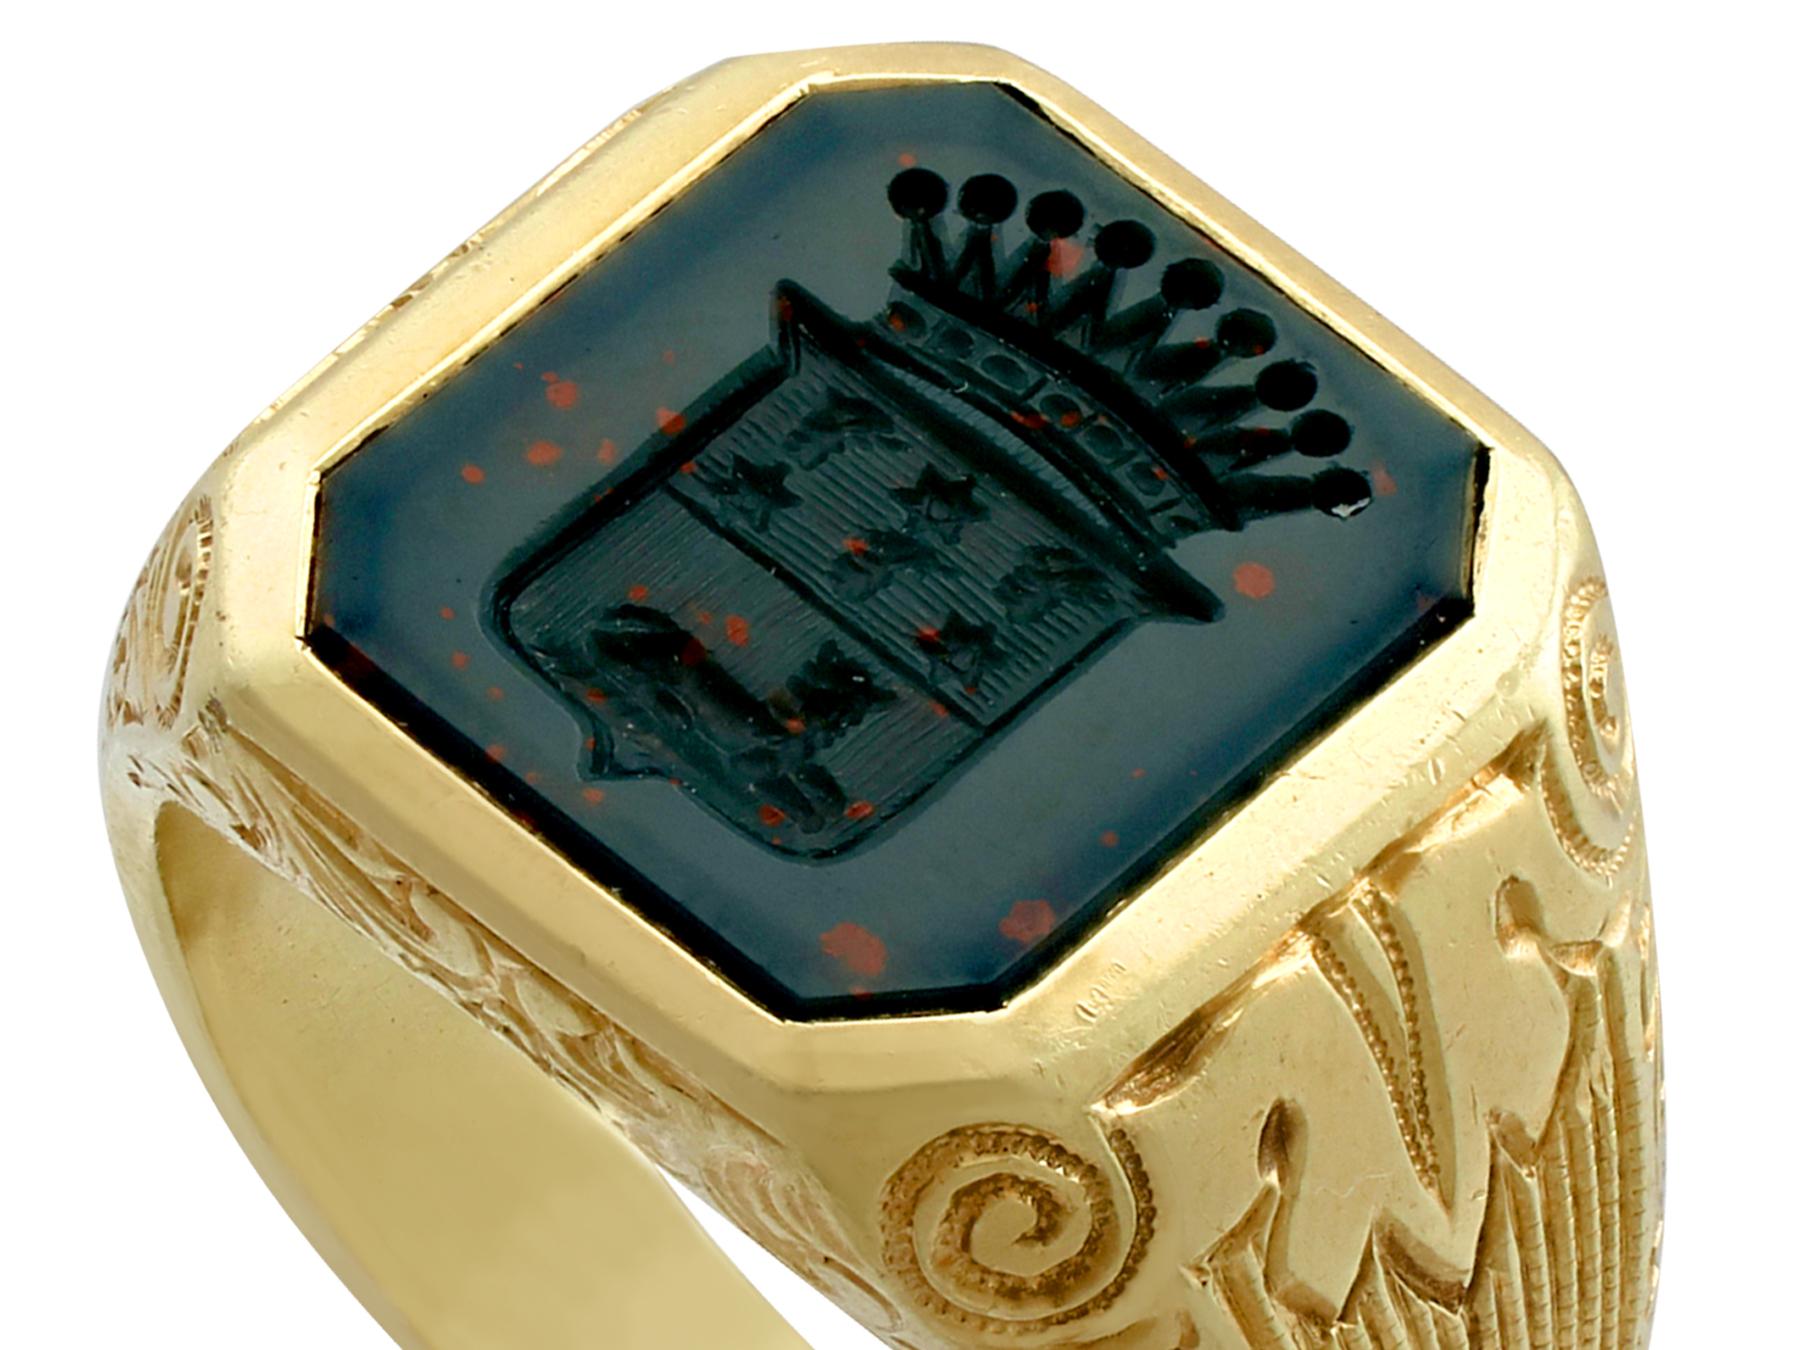 An impressive antique 1930's bloodstone and 14 carat yellow gold signet ring; part of our diverse antique jewellery and estate jewelry collections.

This fine and impressive antique signet ring has been crafted in 14ct yellow gold.

The substantial